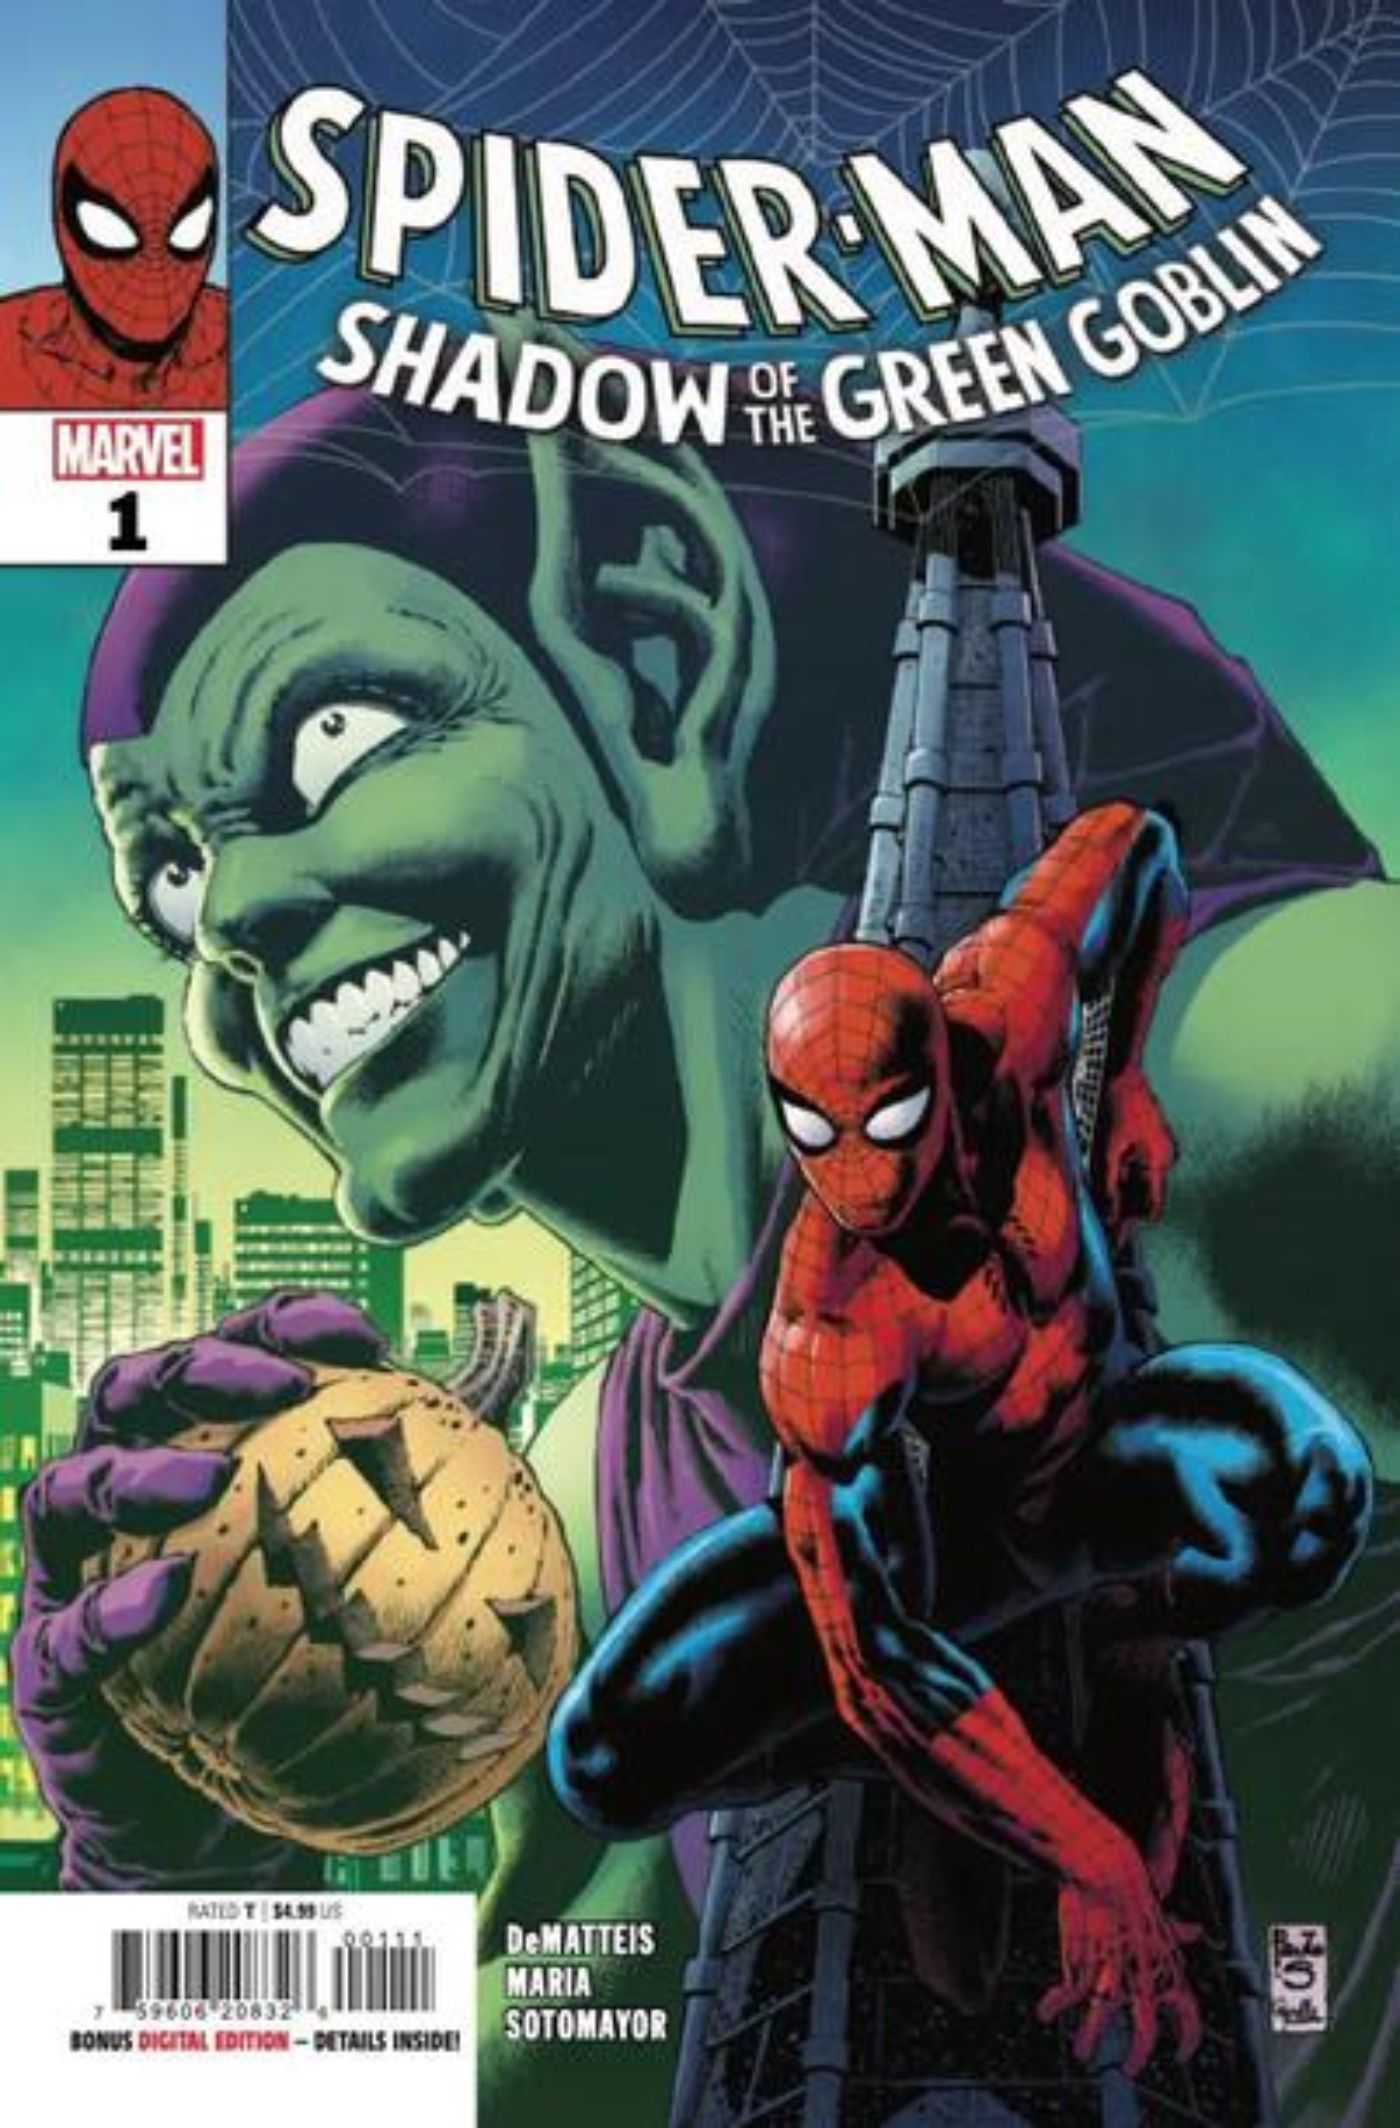 Spider-Man: Shadow of the Green Goblin #1 cover featuring Spider-Man and the Green Goblin.